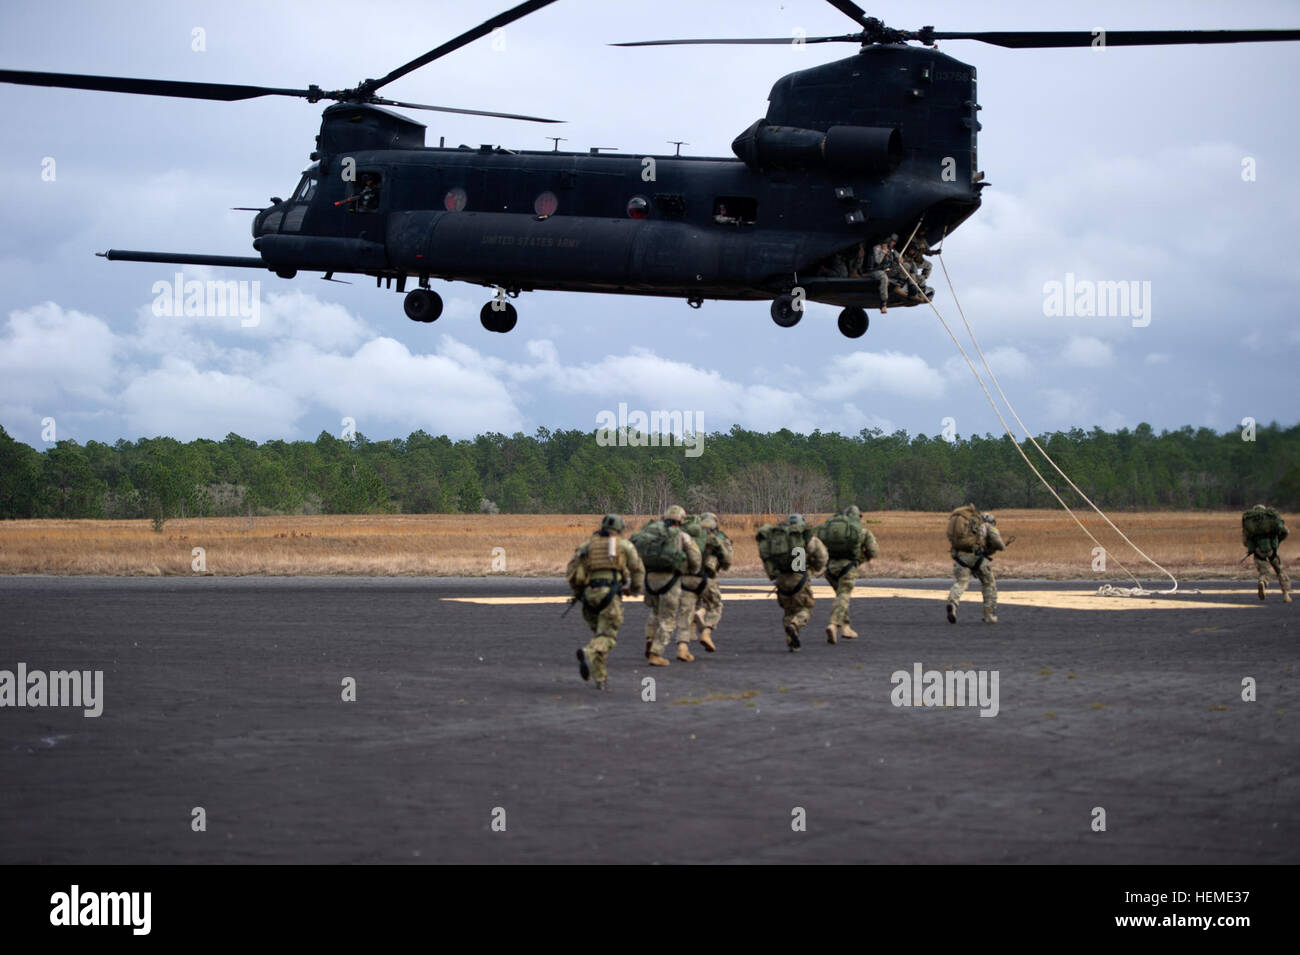 U.S. Soldiers of Operational Detachment Alpha, with the 7th Special Forces Group (Airborne), run towards a CH-47 Chinook helicopter during a training event at Eglin Air Force Base, Fla., Feb. 5, 2013. Green Beret Soldiers of 7th Special Forces Group practiced Special Purpose Insertion Extraction, a technique used to rapidly insert or extract Soldiers from terrain that does not allow helicopters to land. (U.S. Army photo by Spc. Steven Young/Released) Green Berets practice SPIES and FRIES 130205-A-YI554-138 Stock Photo